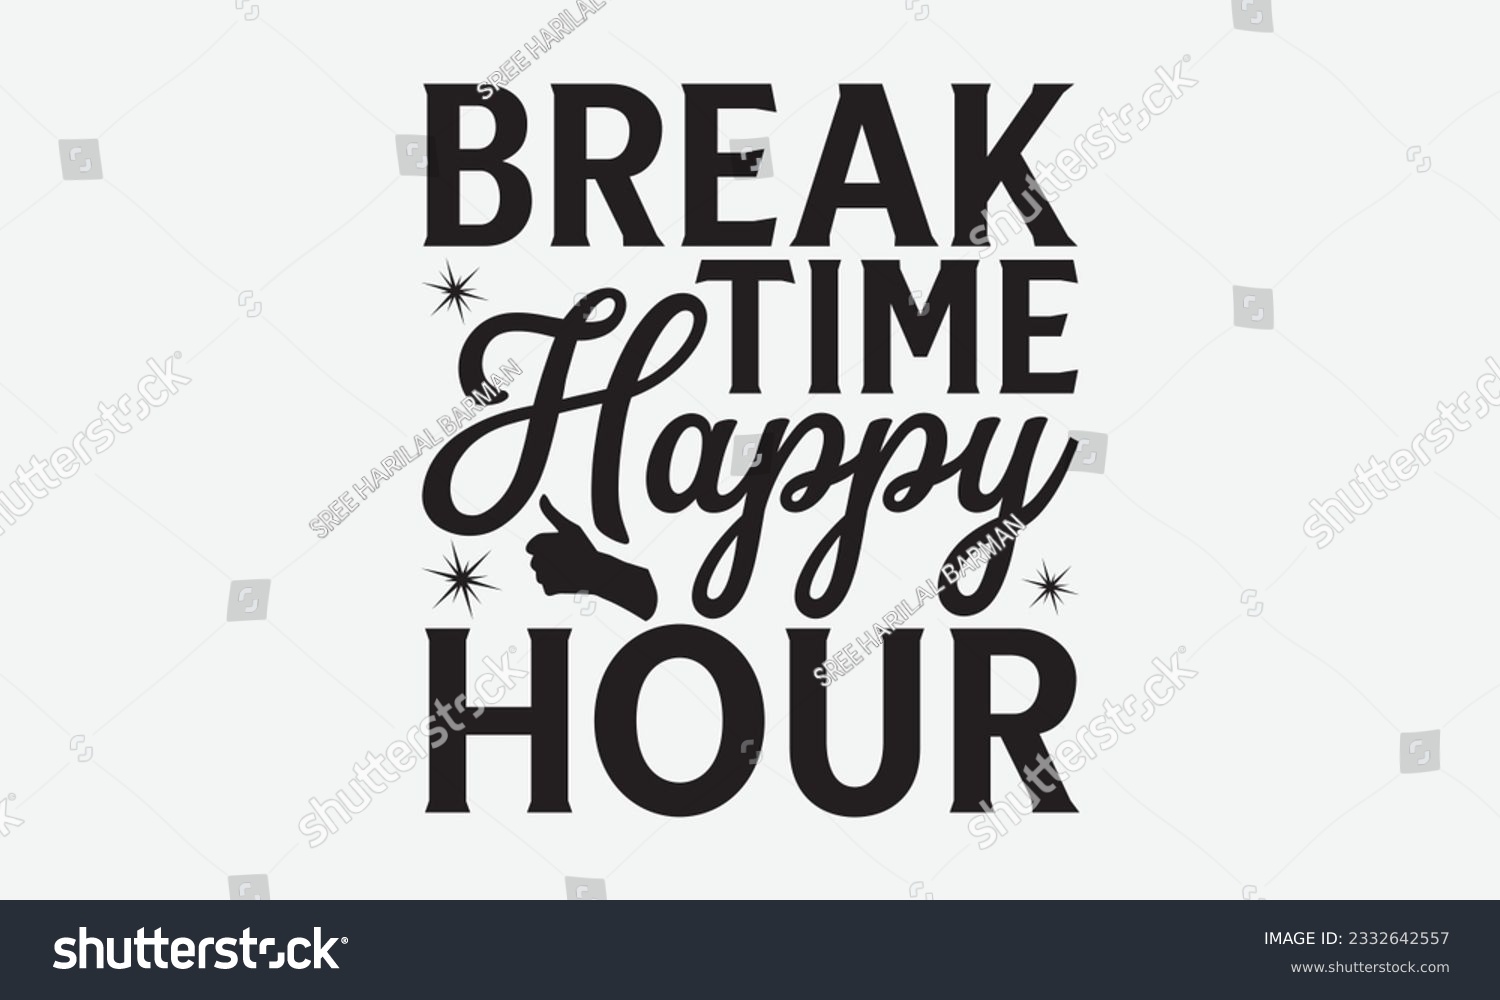 SVG of Break Time Happy Hour - Labor svg typography t-shirt design. celebration in calligraphy text or font Labor in the Middle East. Greeting cards, templates, and mugs. EPS 10. svg